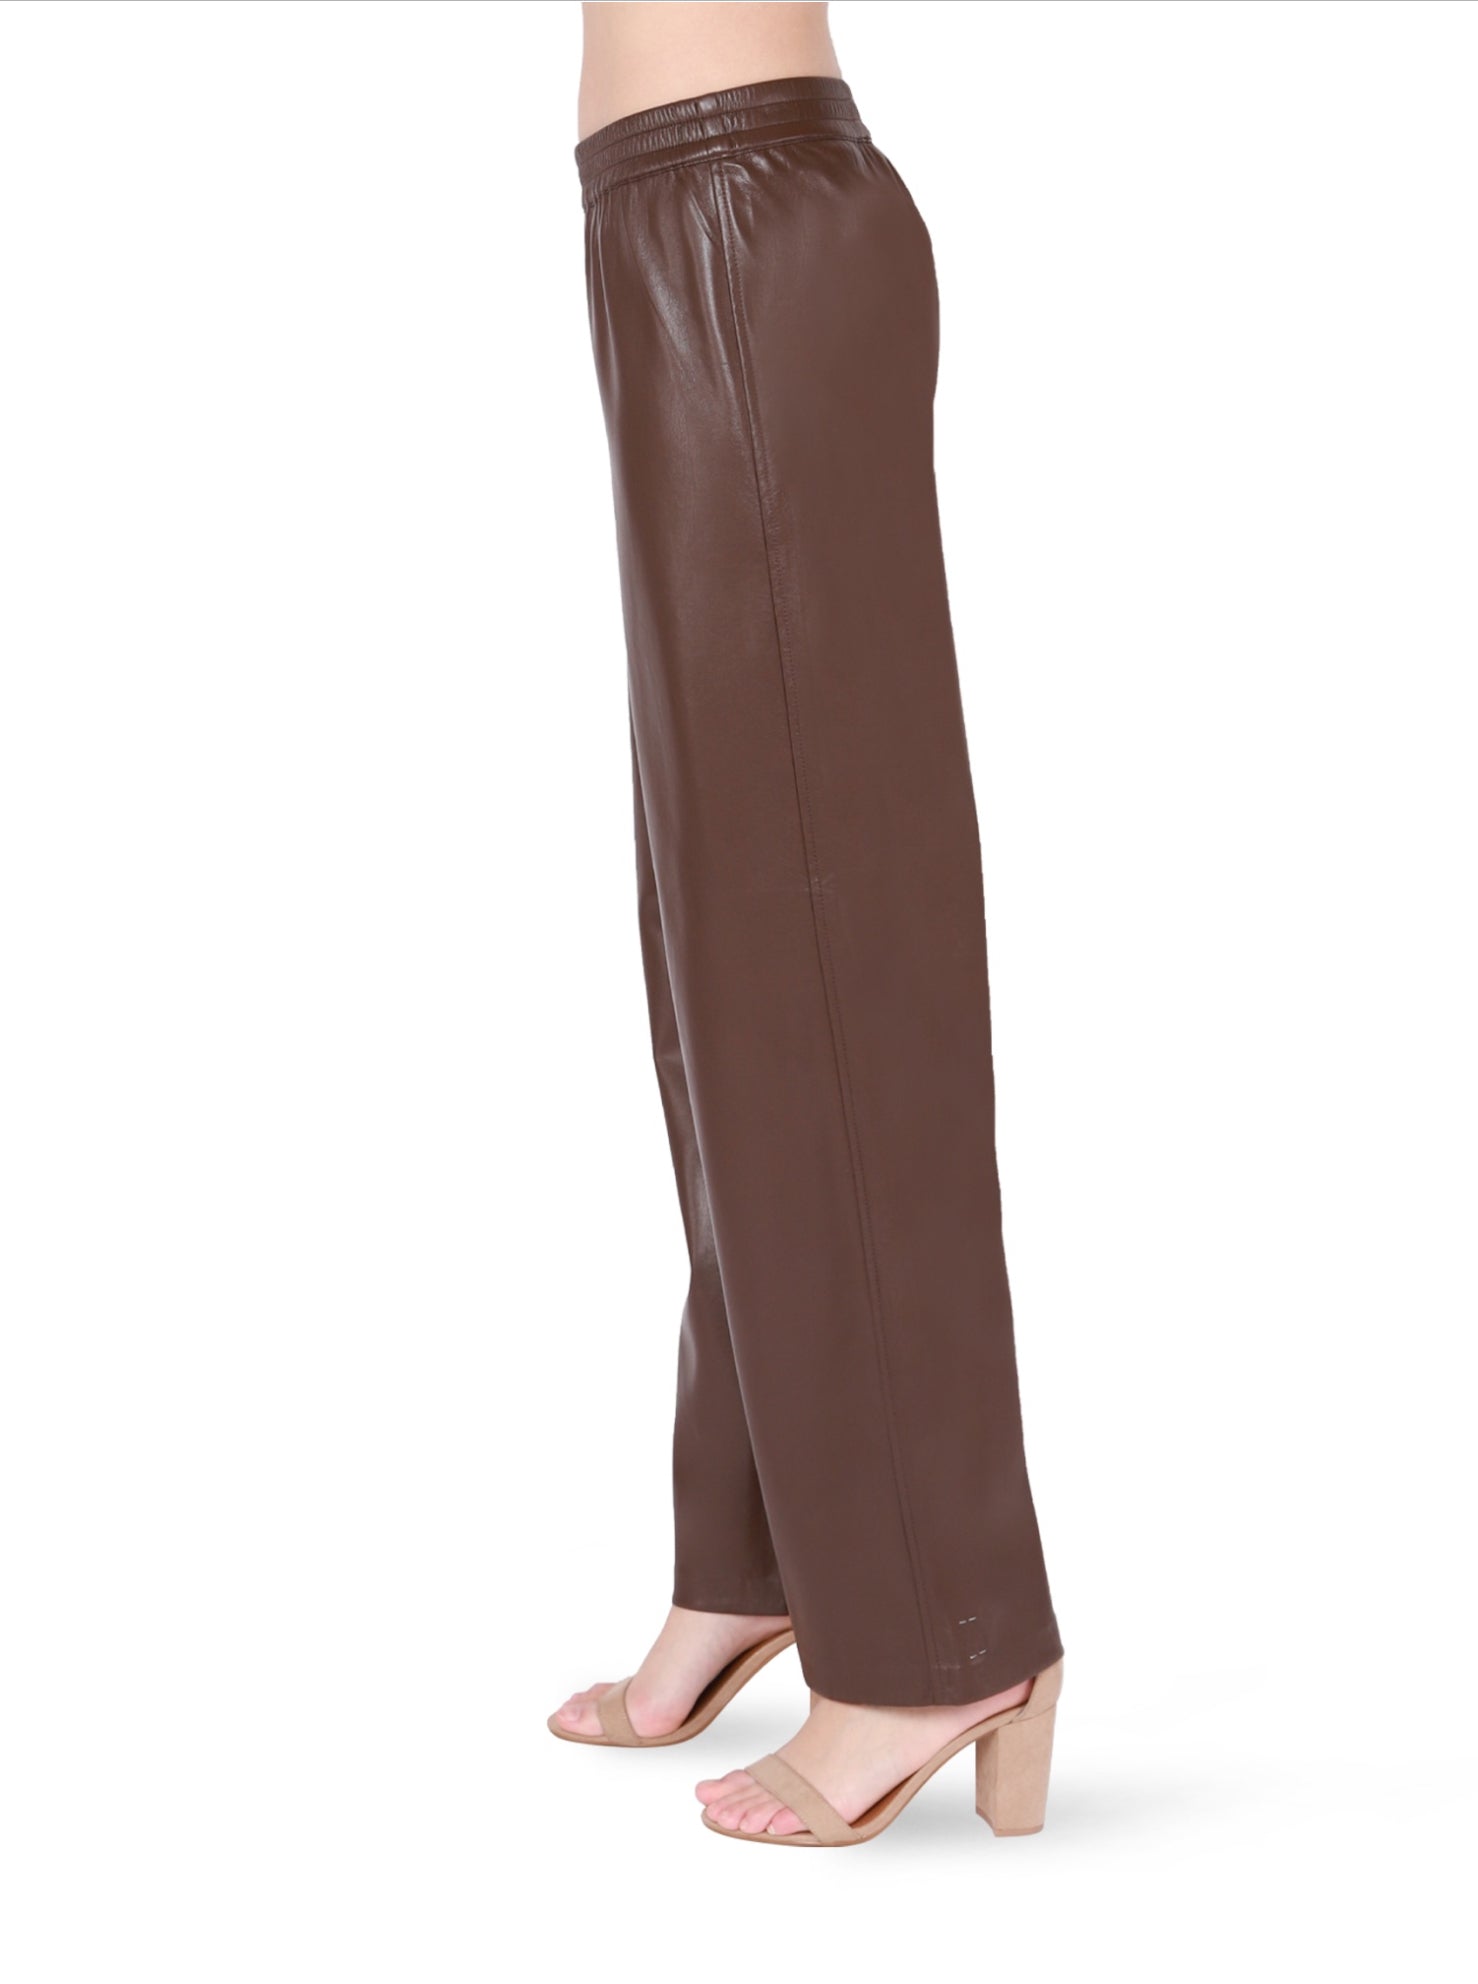 Pull on wide leg faux leather pants by Black Tape - milk chocolate brown - Blue Sky Fashions & Lingerie